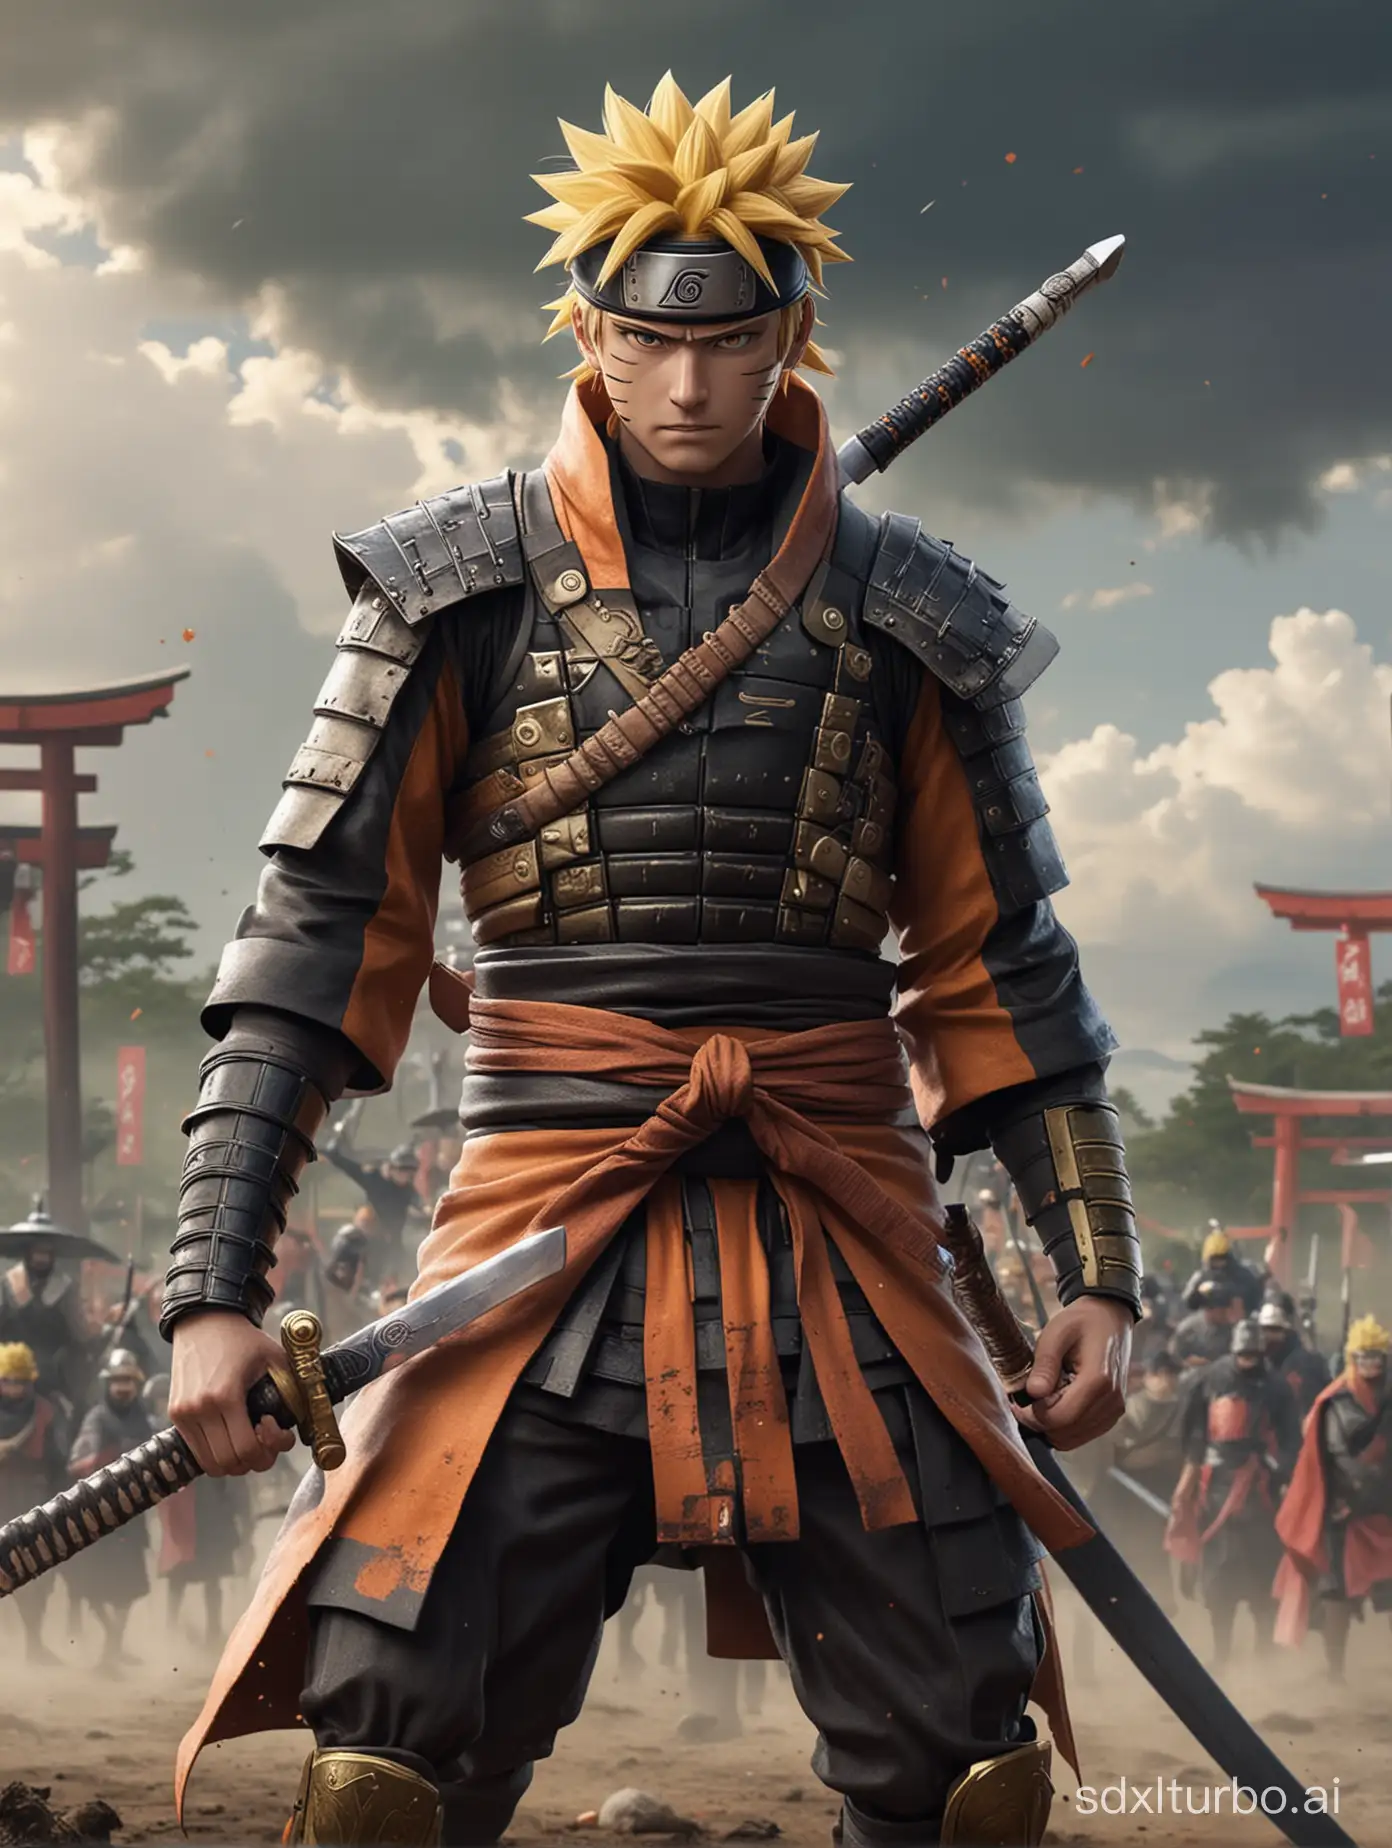 Naruto puts on ancient Japanese warrior armor and wields a katana on the battlefield